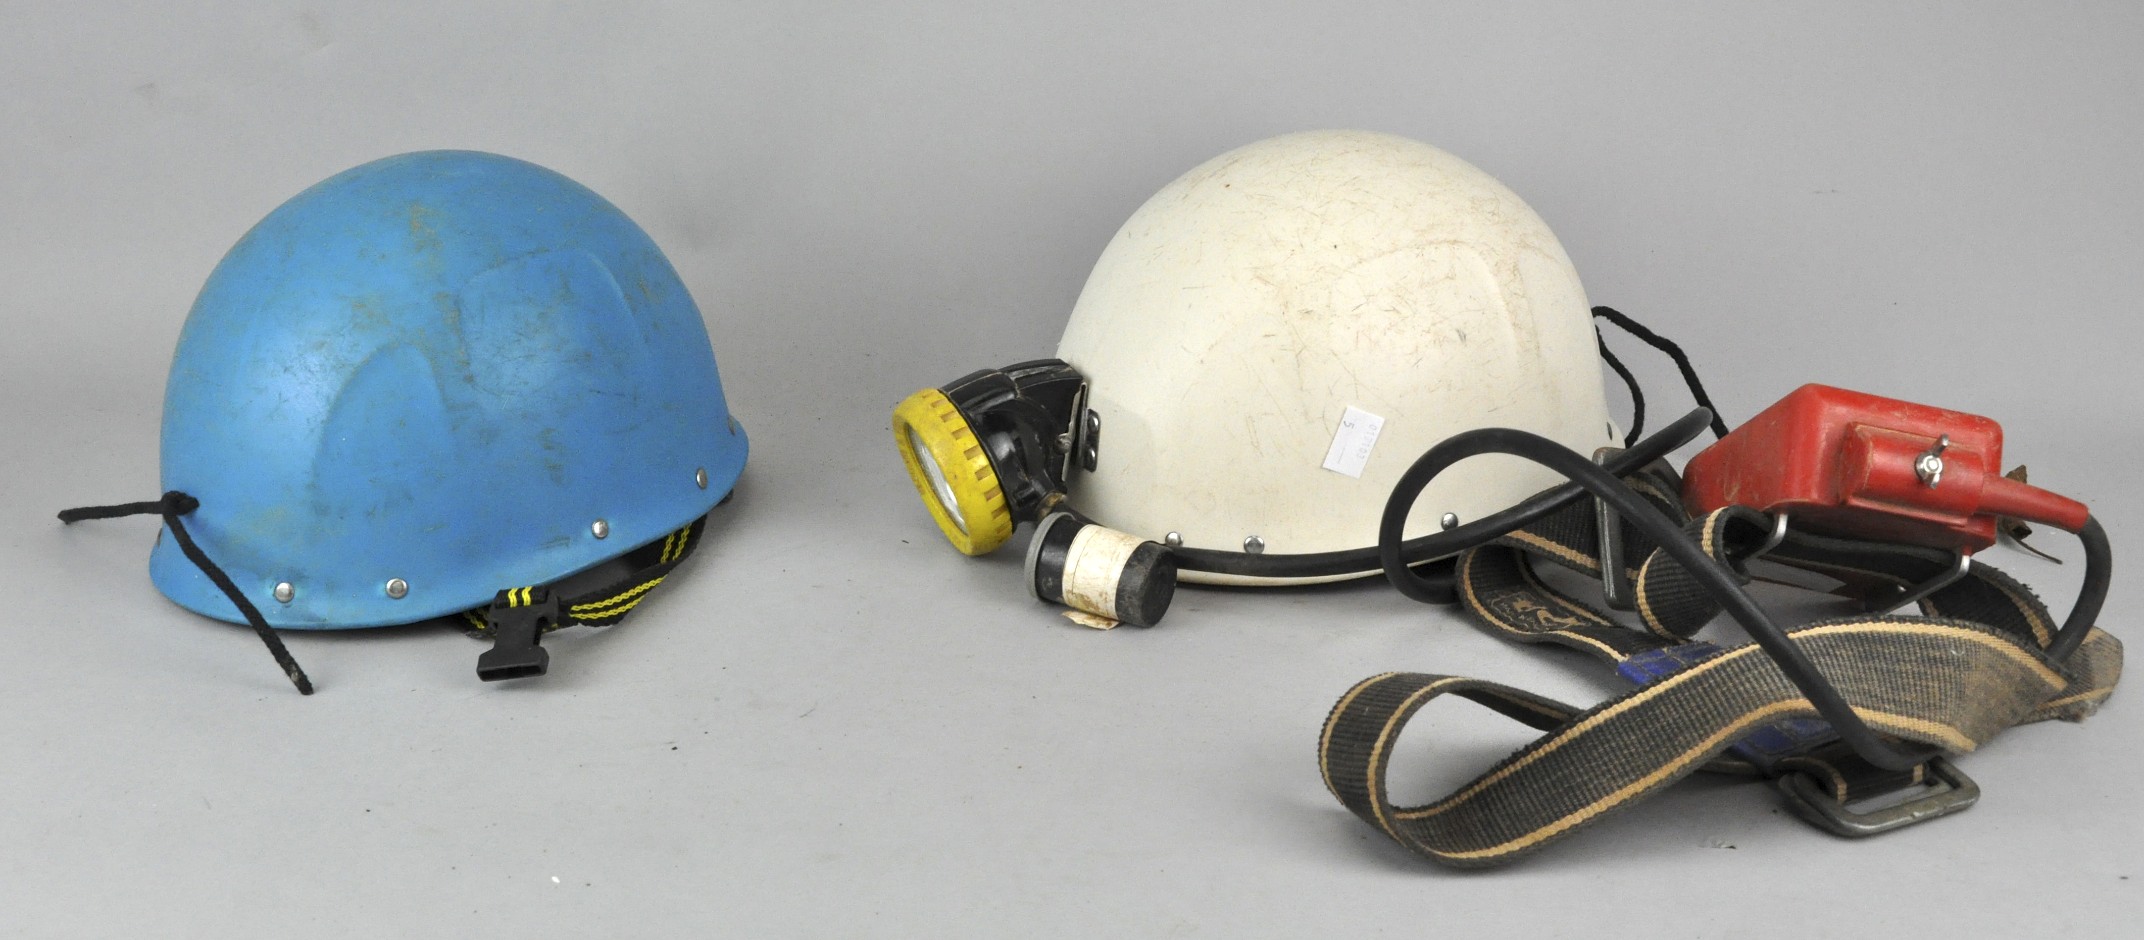 Two caving helmets with a battery pack